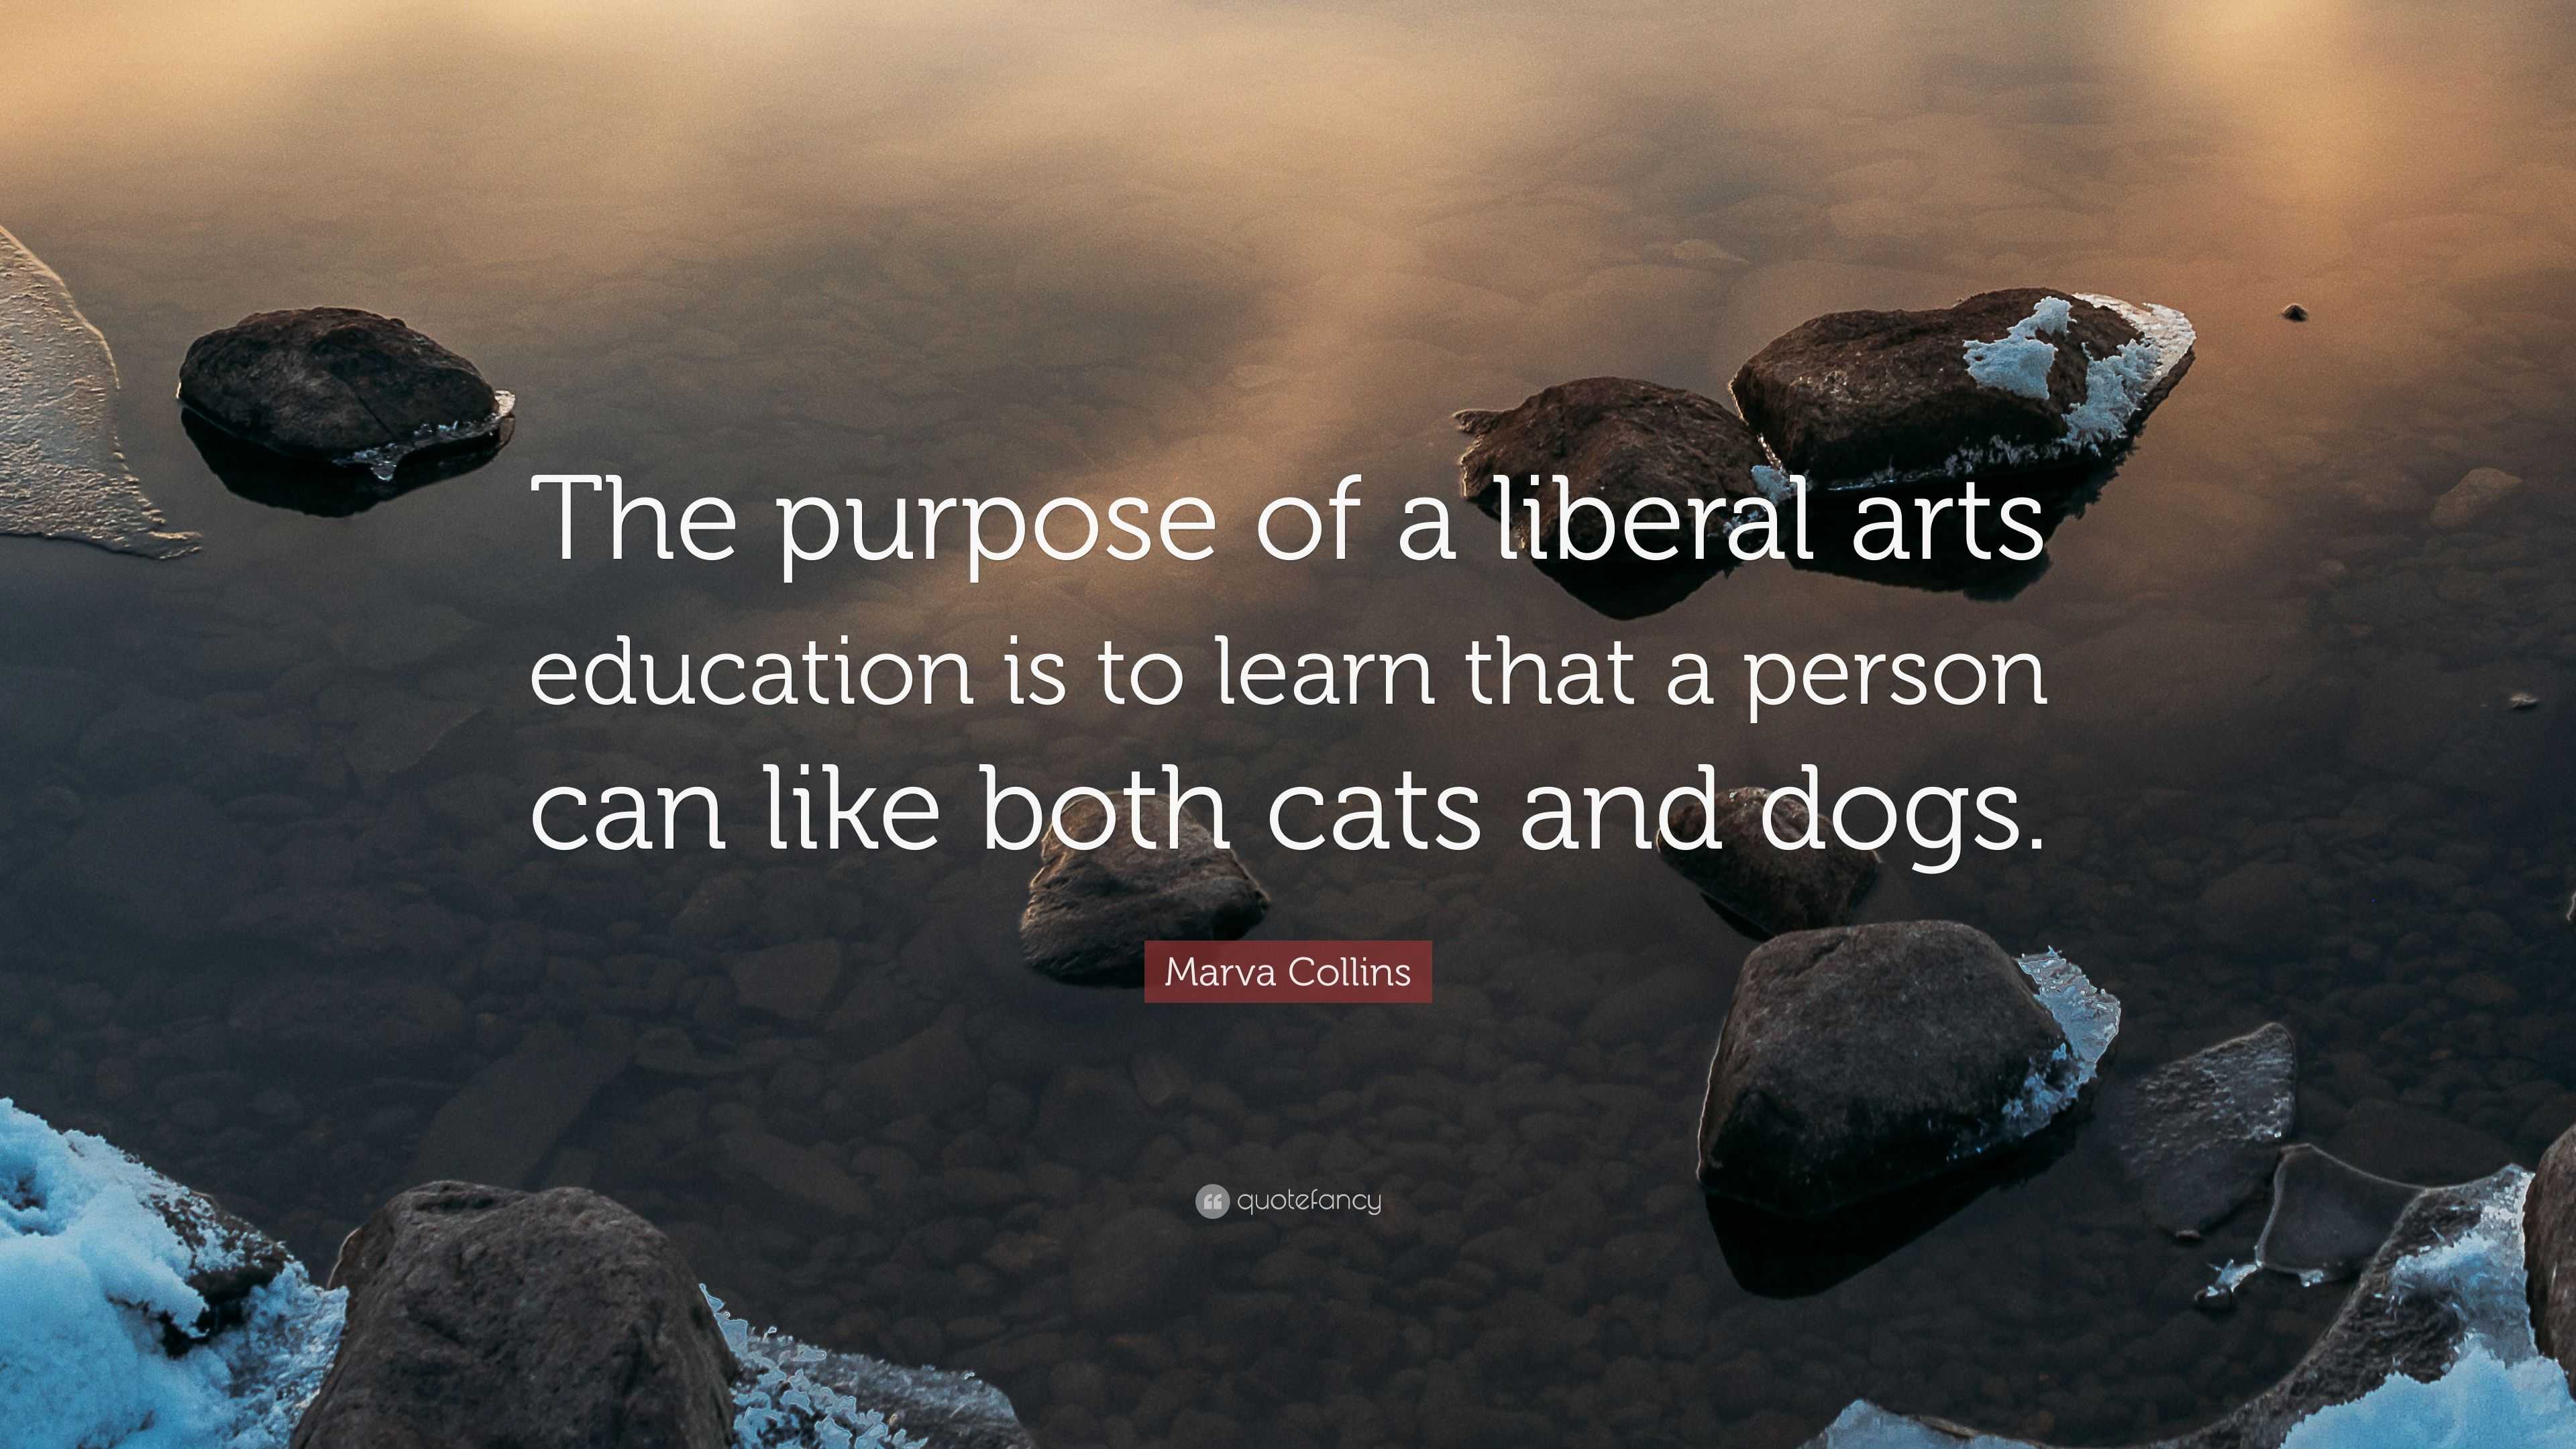 Marva Collins Quote: “The purpose of a liberal arts education is to ...